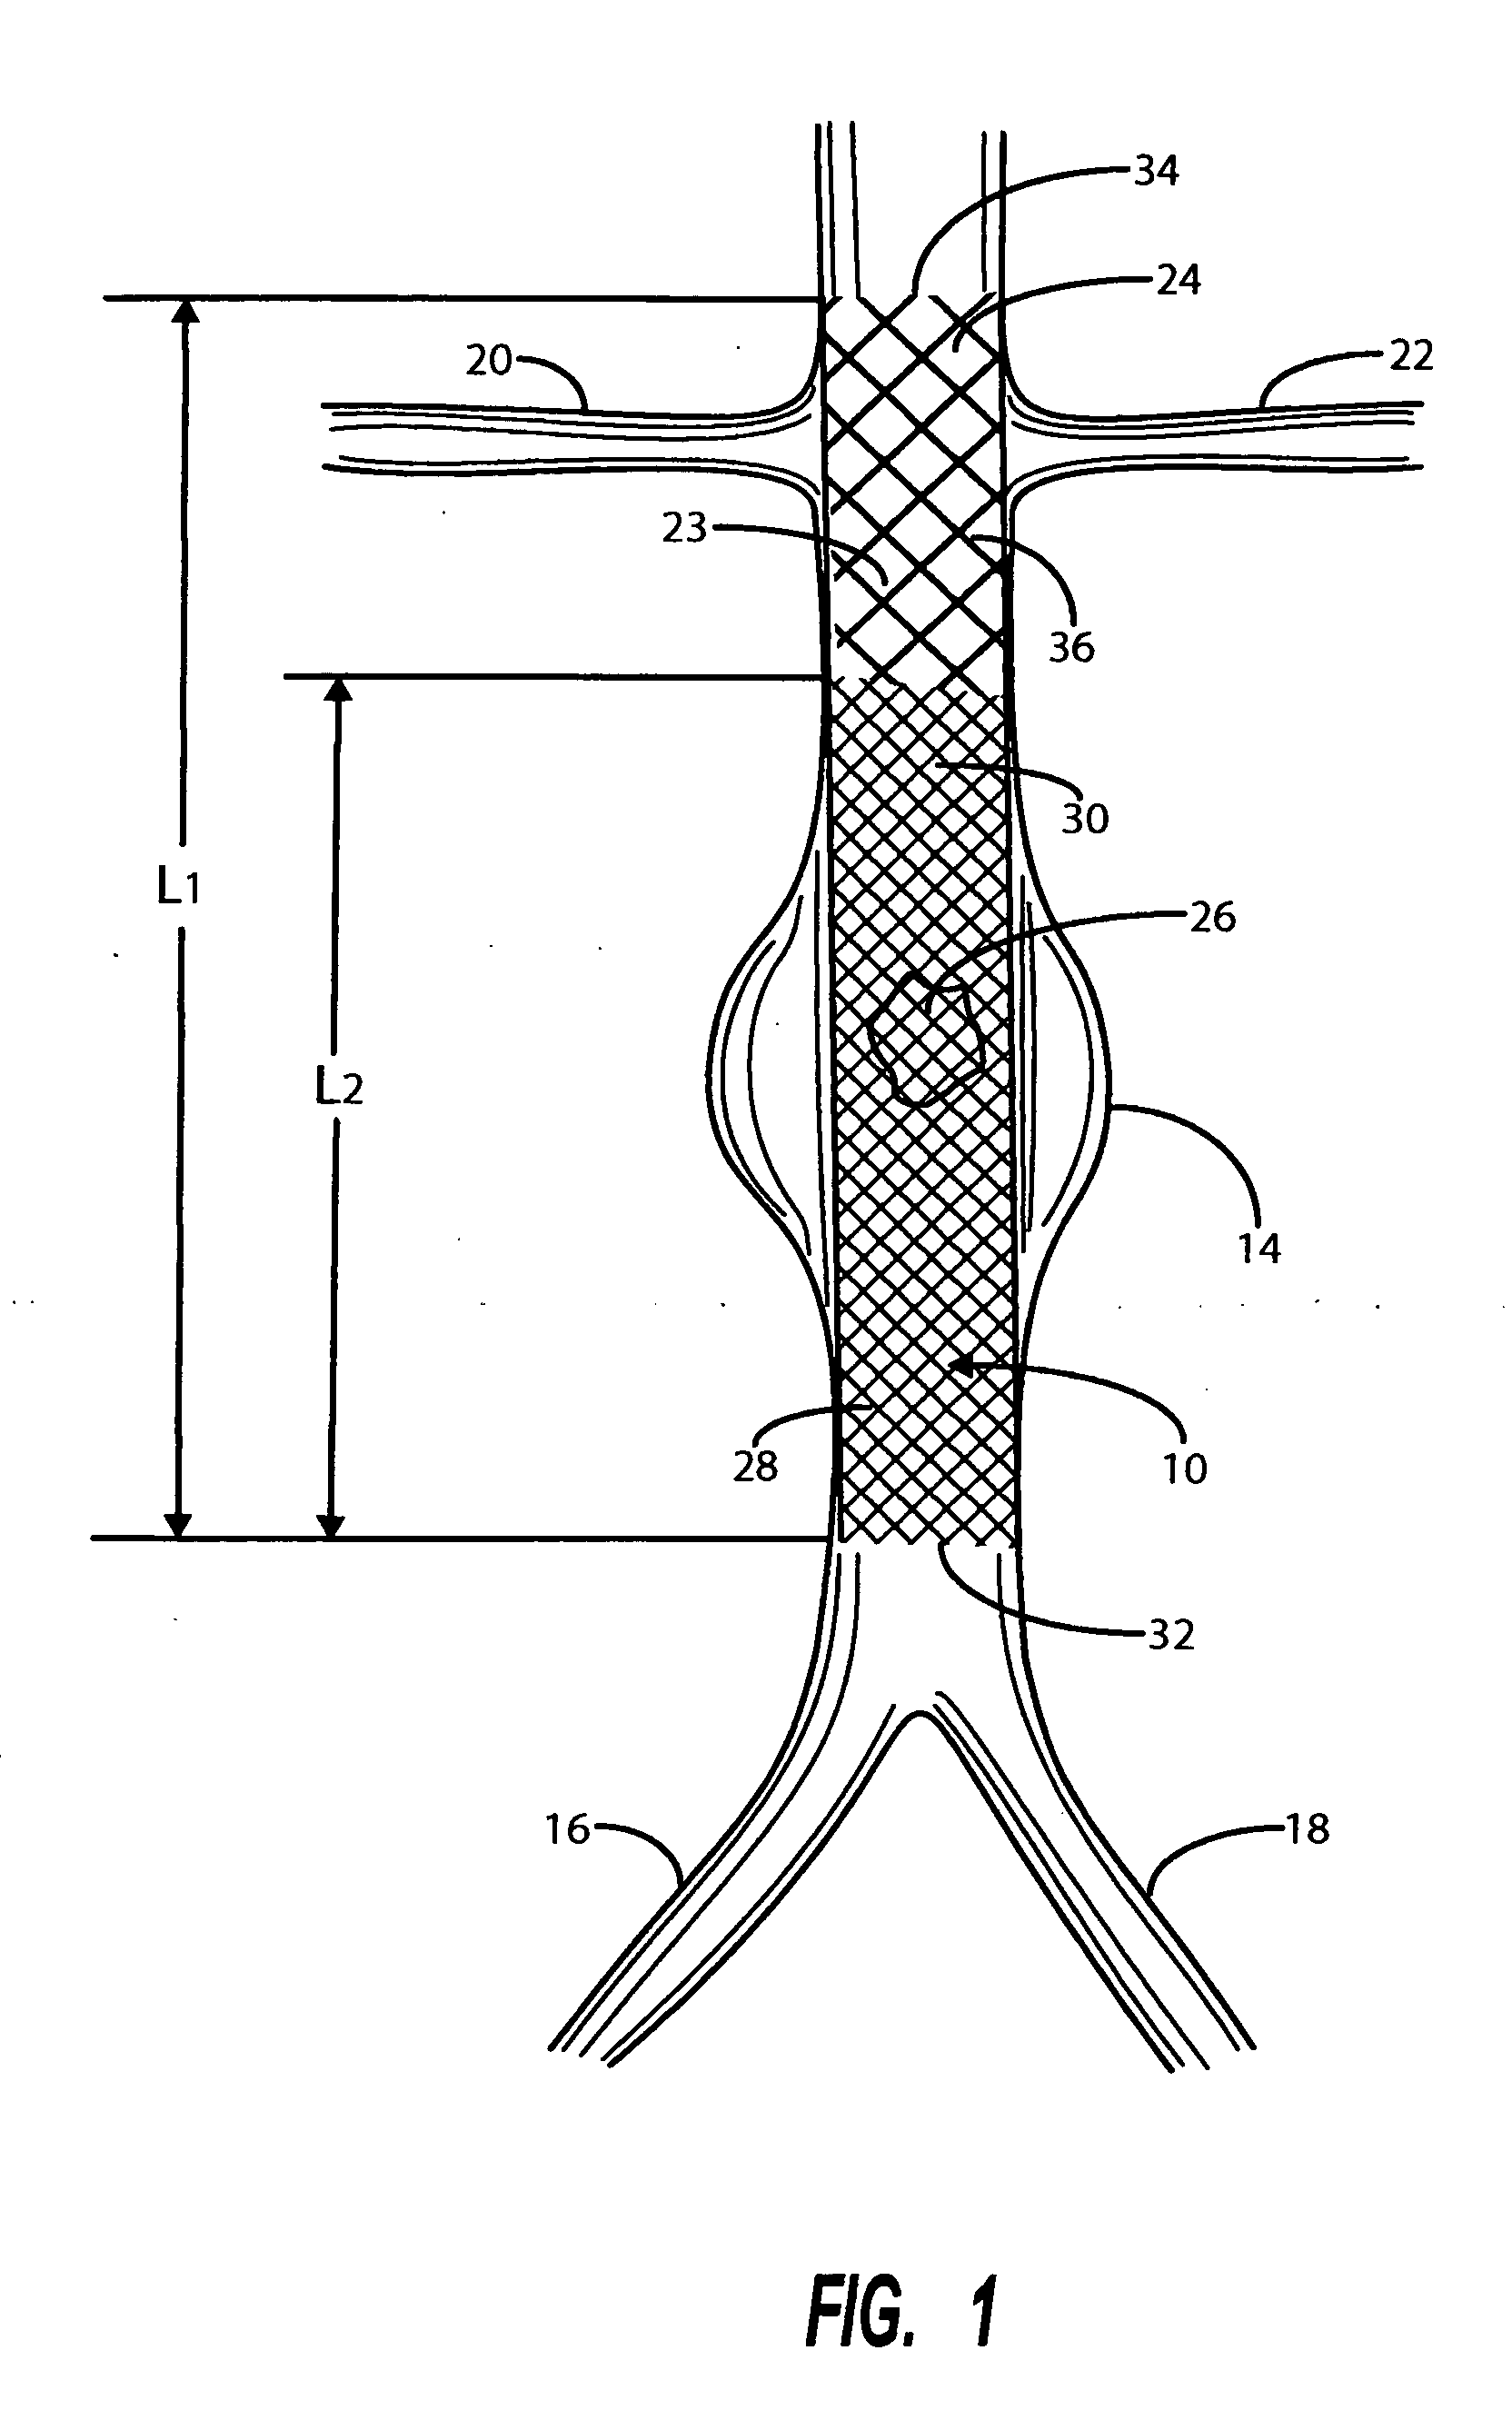 Intravascular deliverable stent for reinforcement of abdominal aortic aneurysm